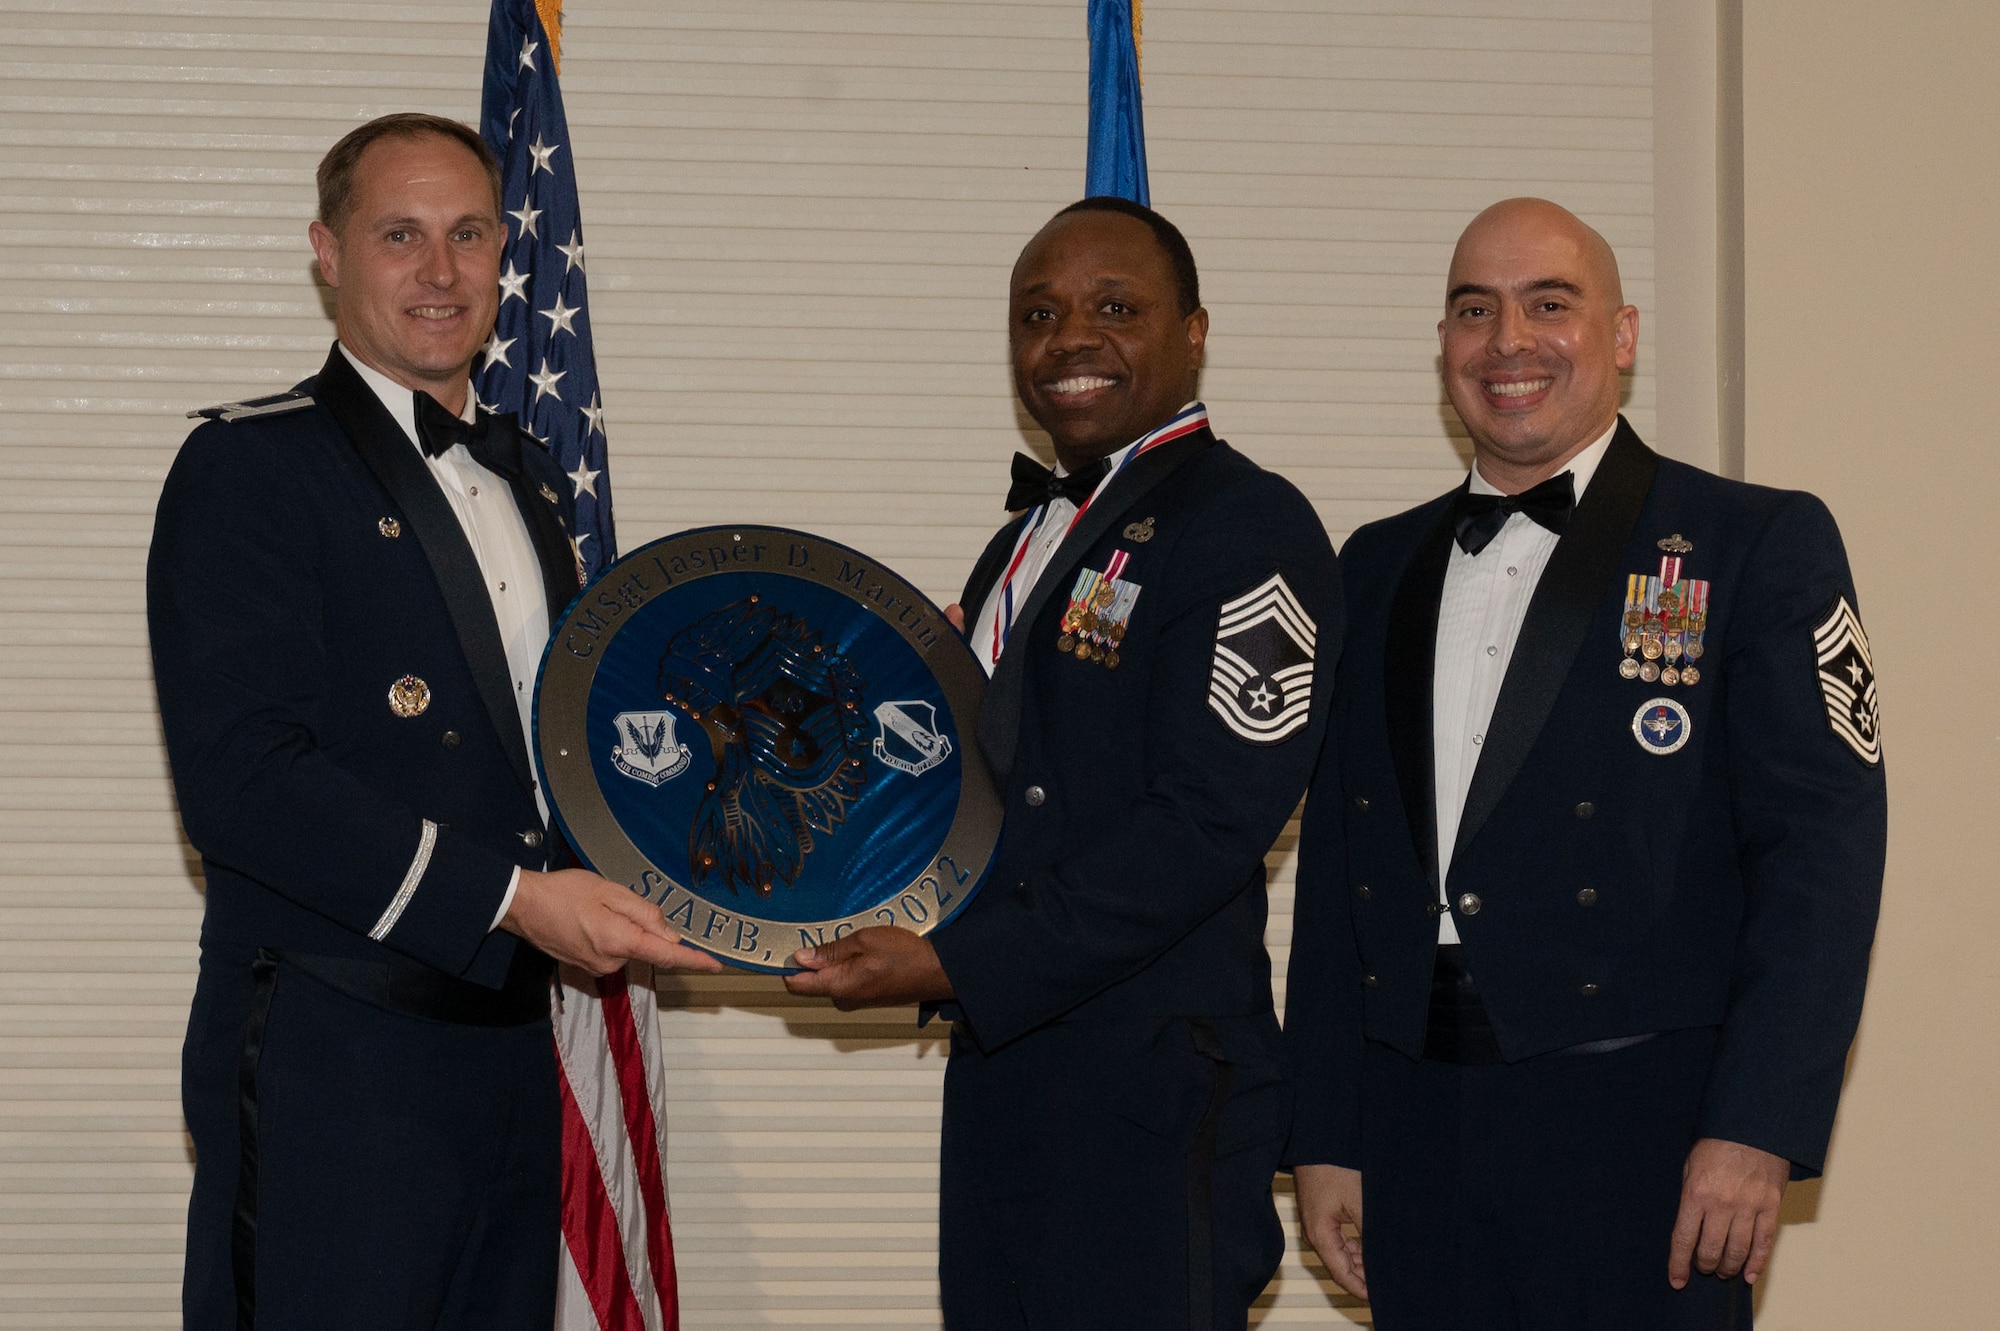 Col. Lucas Teel, 4th Fighter Wing commander, and Chief Master Sgt. Peter Martinez, 4th FW command chief, presents a plaque to Chief Master Sgt. Jasper Martin, 4th Maintenance Group maintenance operations senior enlisted leader, during a Chief Master Sergeant Recognition Ceremony at Seymour Johnson Air Force Base, North Carolina, March 24, 2023. The ceremony honored Seymour Johnson’s newest chief master sergeants and selects for achieving the top enlisted grade in the Air Force. (U.S. Air Force photo by Airman 1st Class Rebecca Sirimarco-Lang)